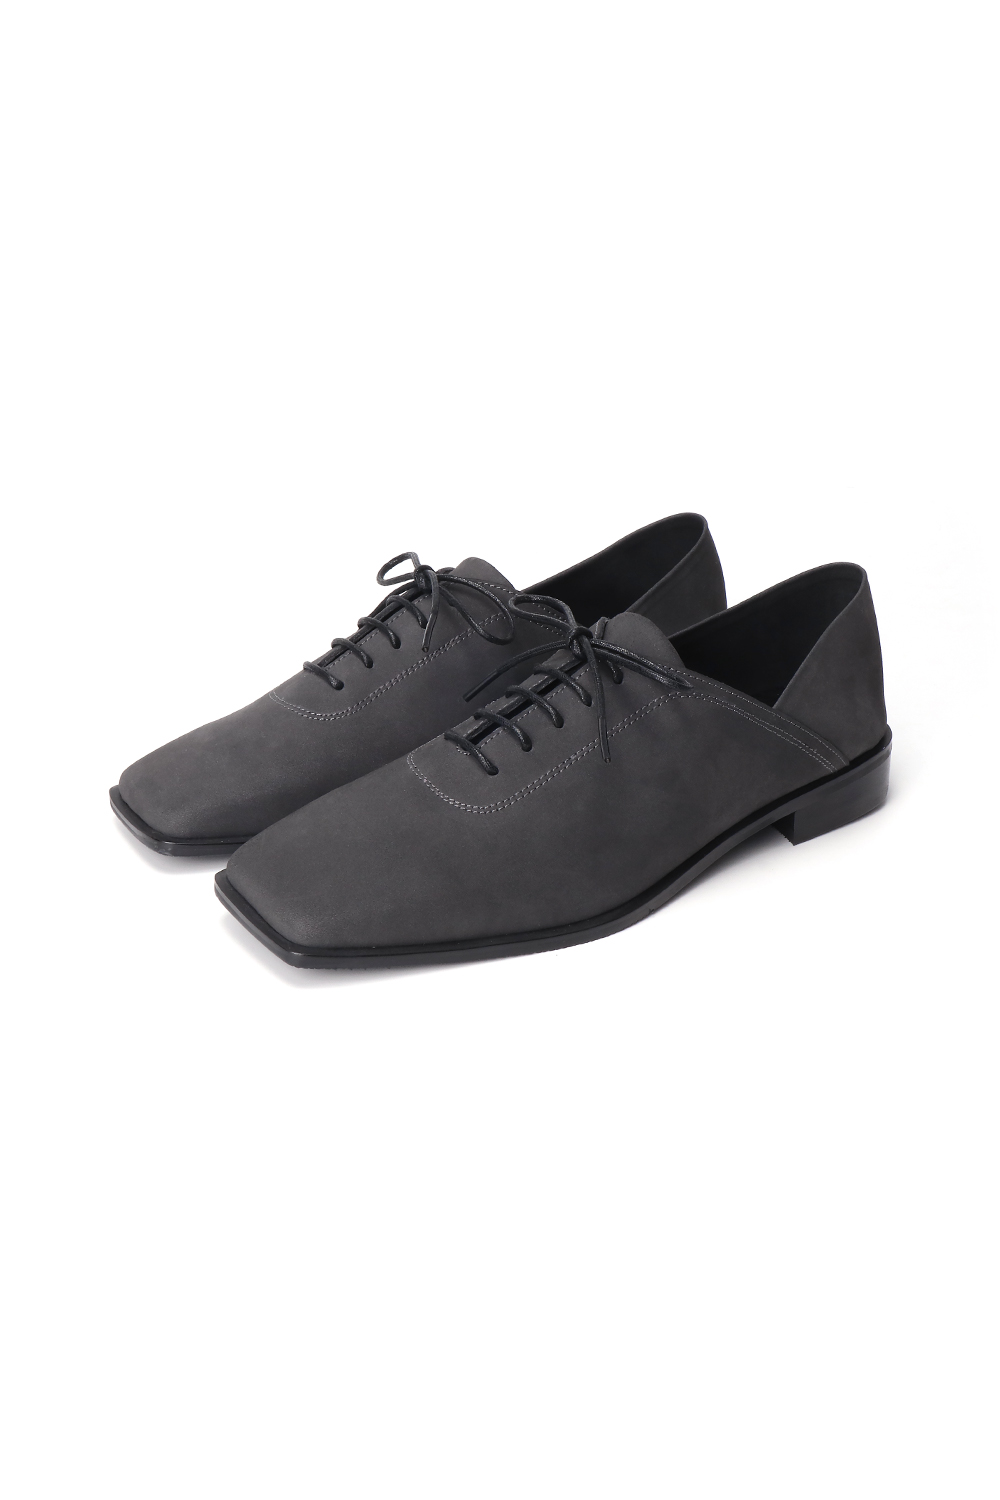 MAZEN SQUARE TOE DERBY SHOES [CHARCOAL]